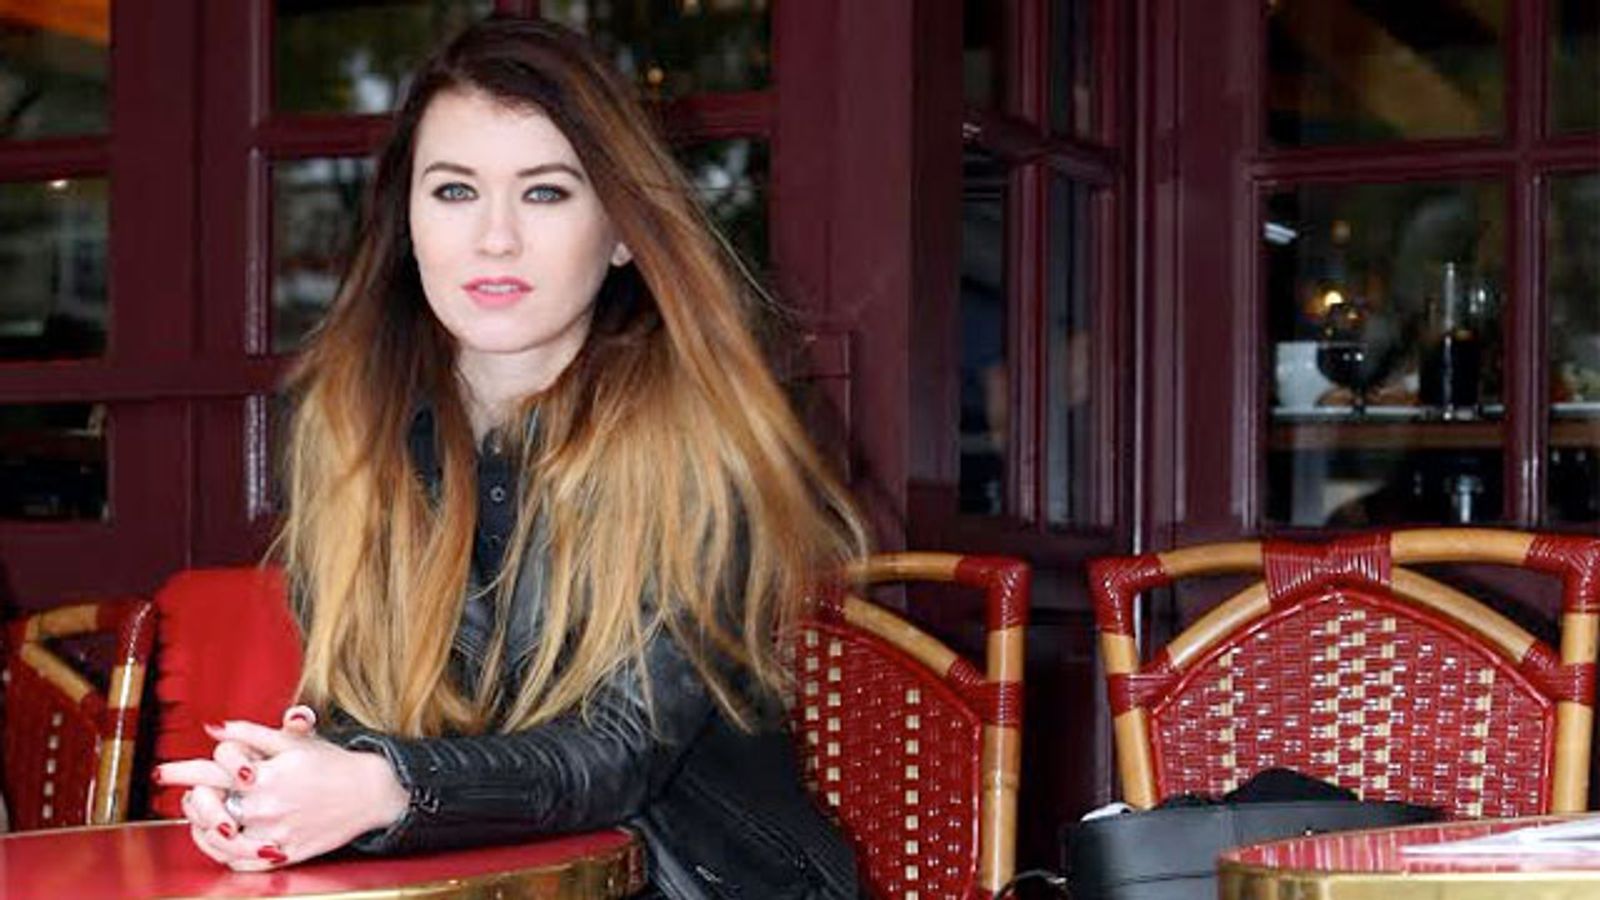 Rebecca Lord Signs Year-Long Contract With Misha Cross